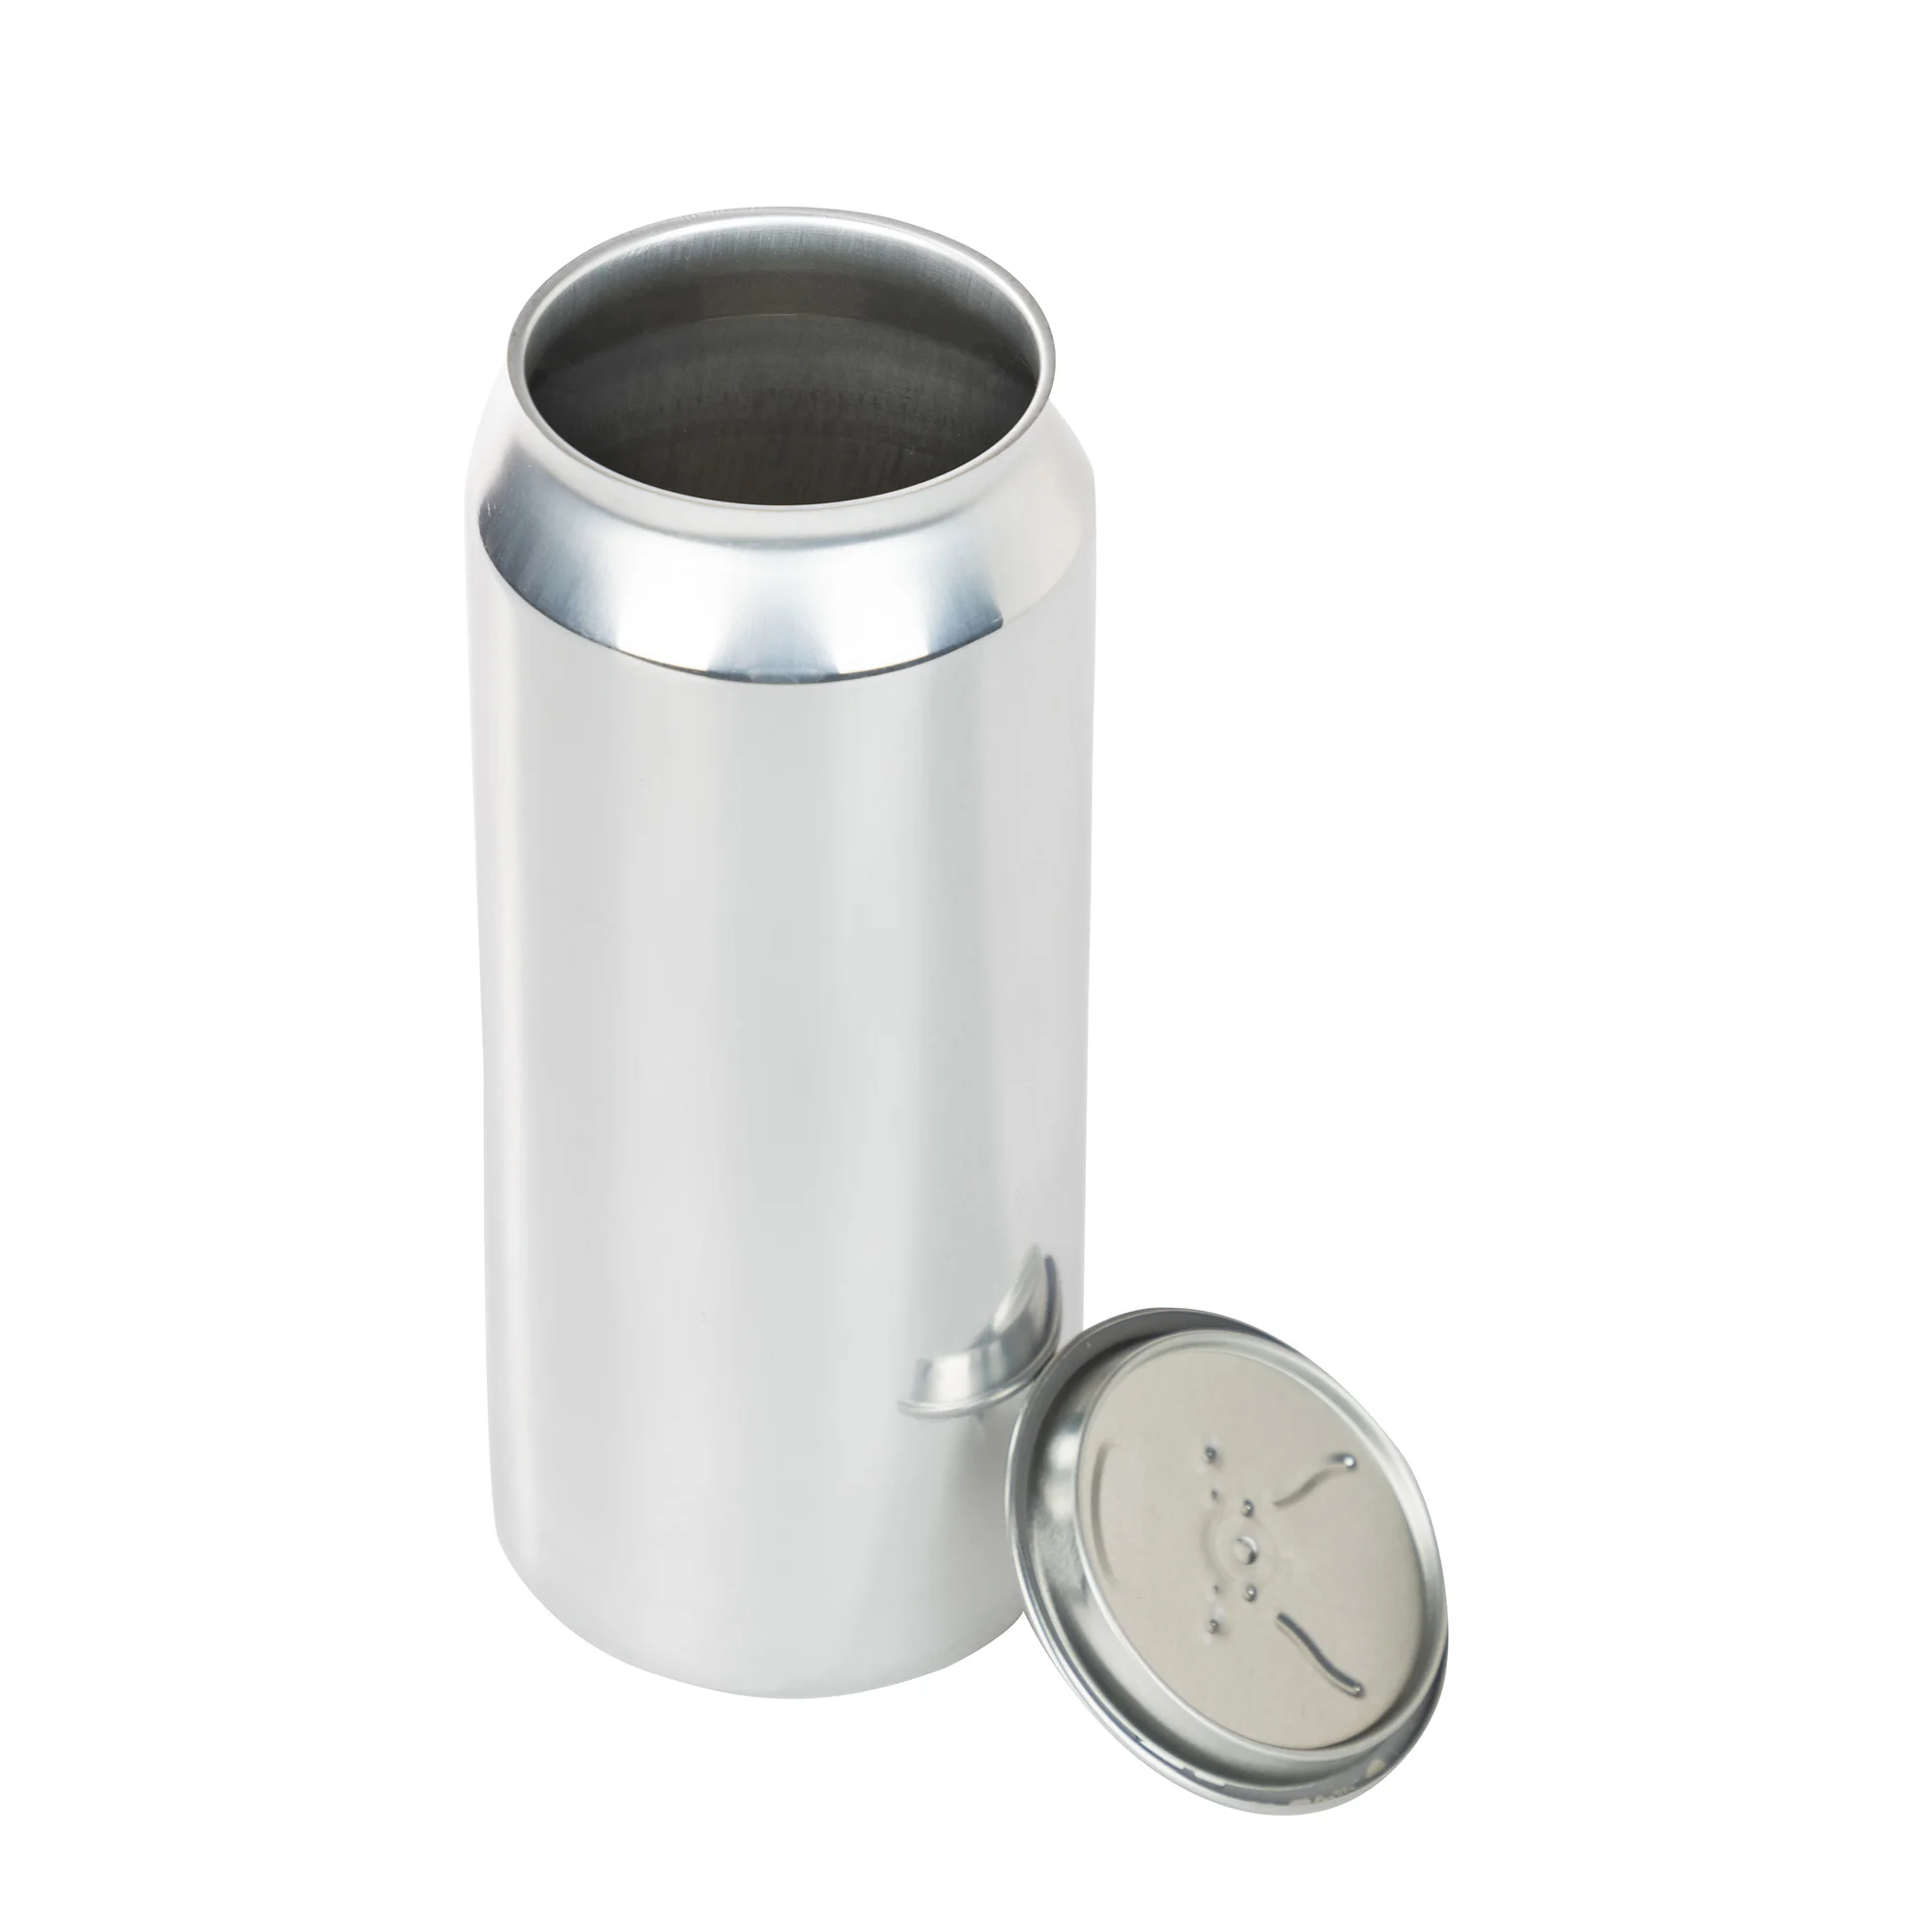 330ml 12oz Empty Aluminium Soda Pop Can With Easy Open End Lid For Beverage Drinking